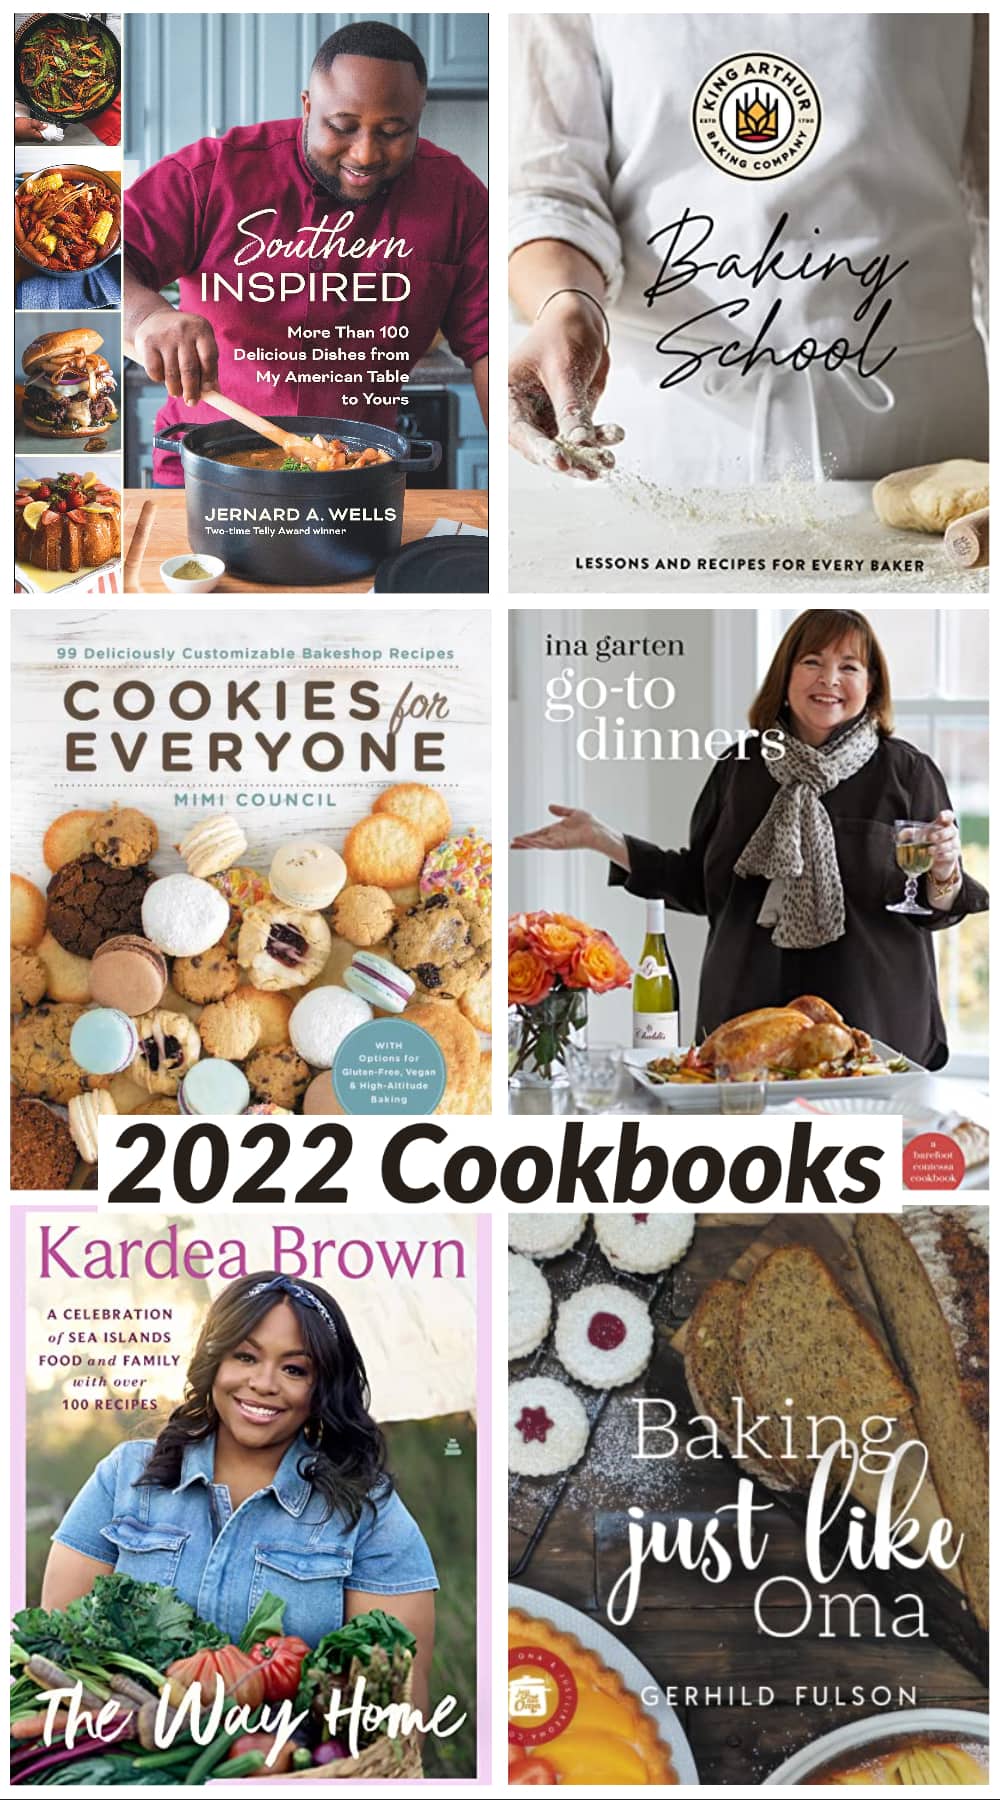 photo collage of cookbooks published in 2022.